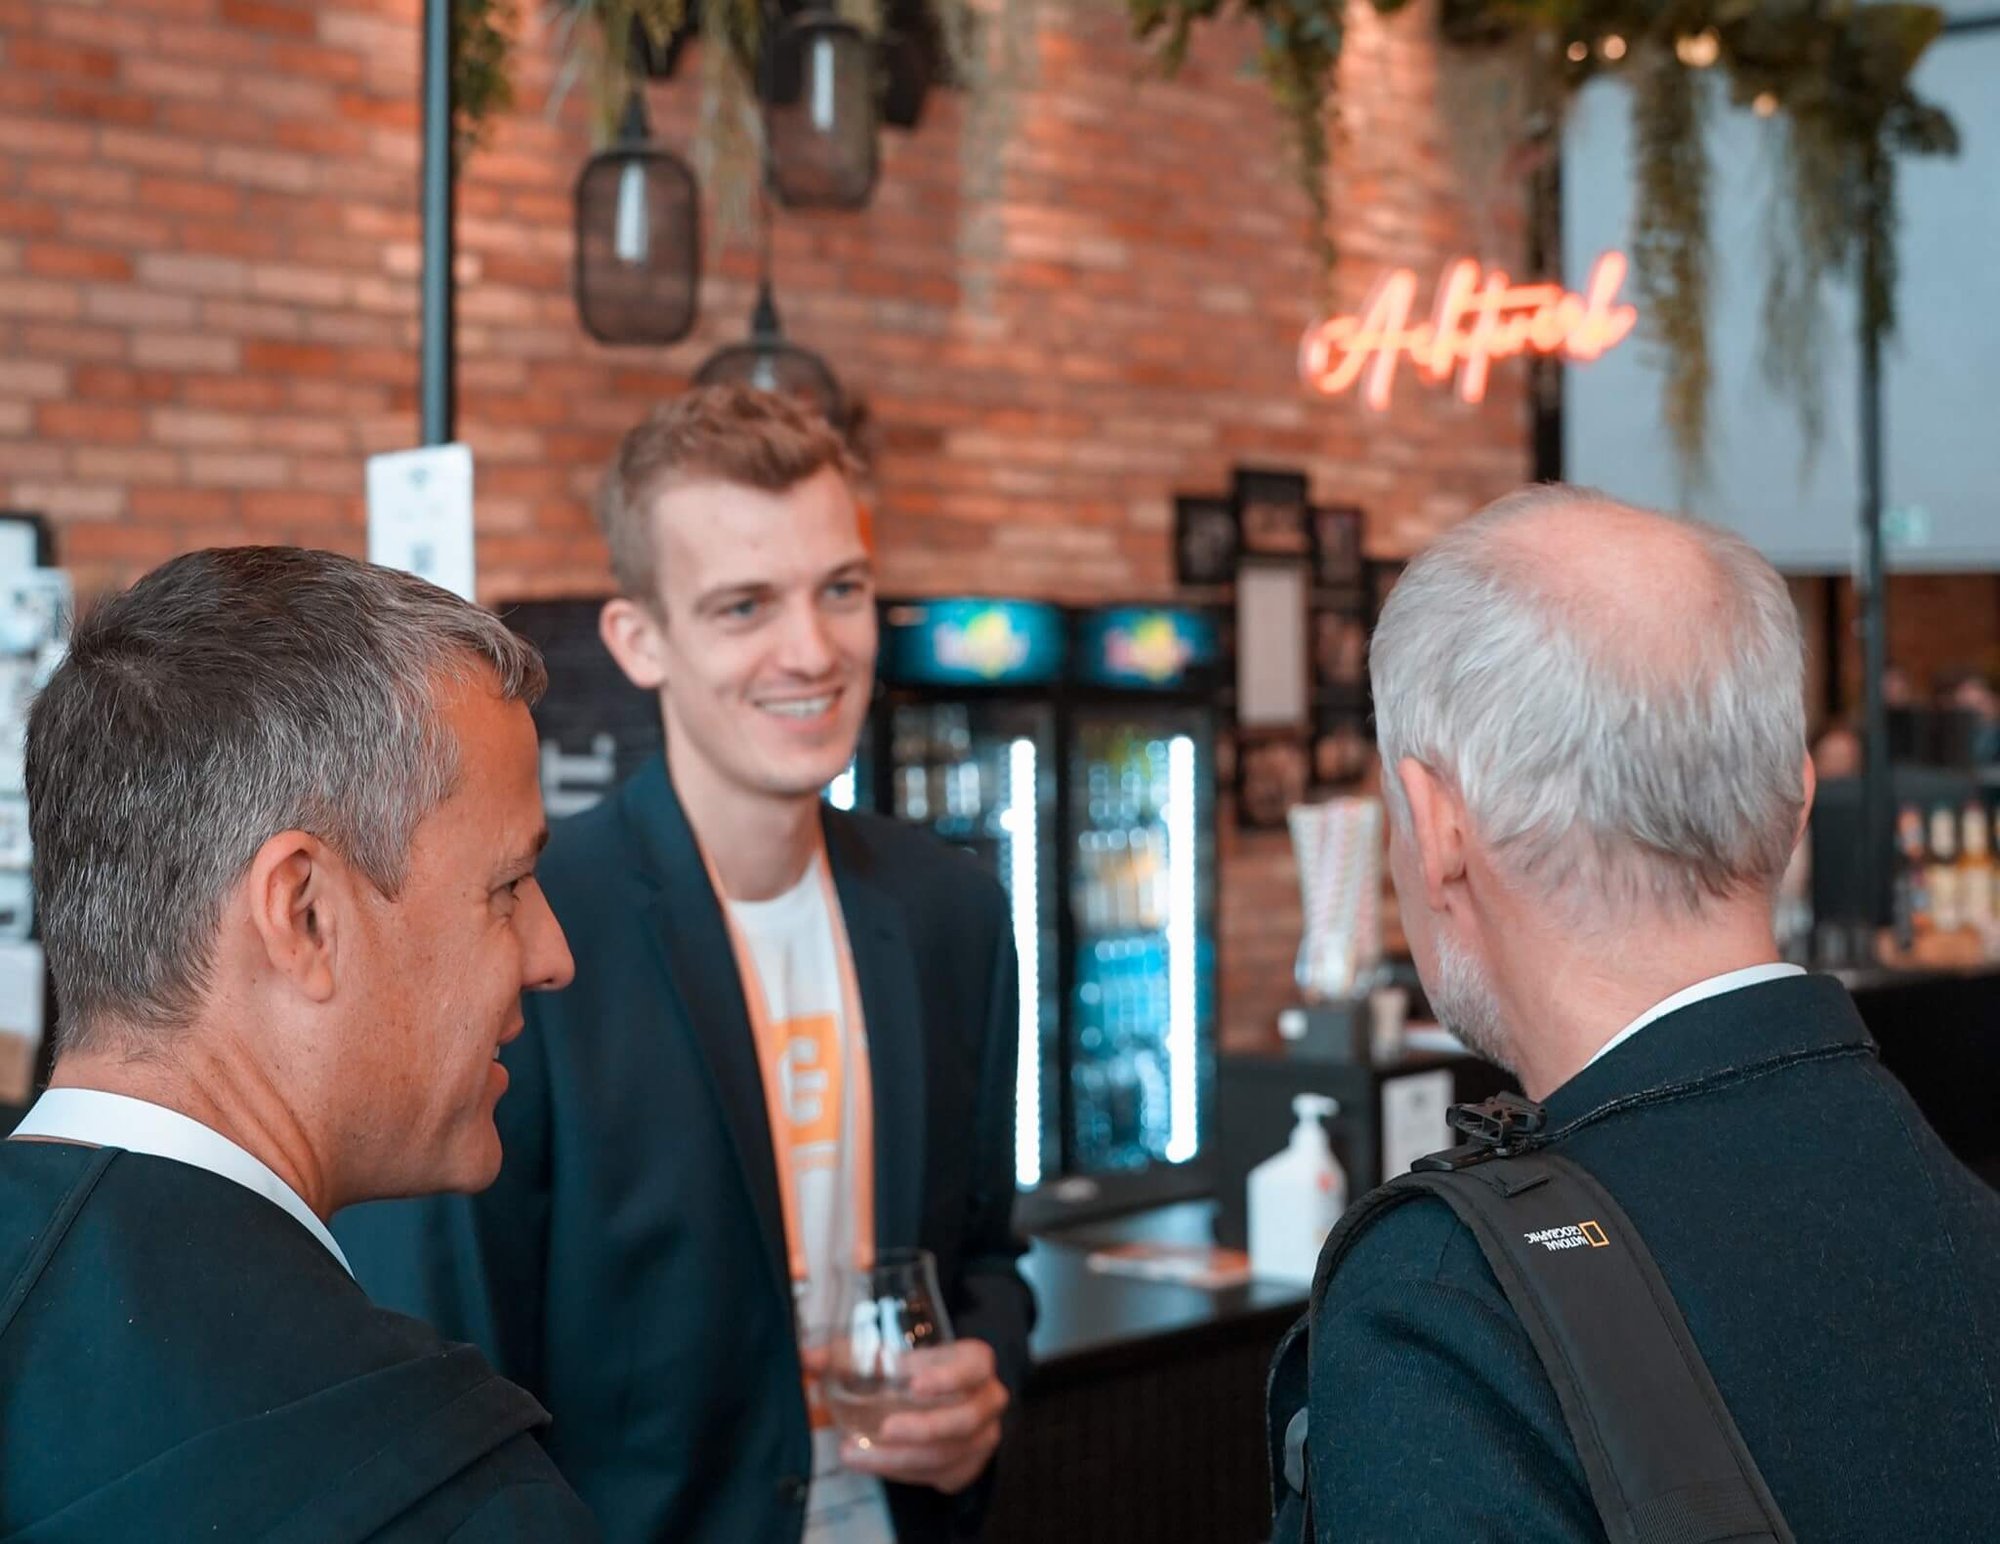 Connect with like-minded individuals, experts, and potential business partners at PARTS FORUM